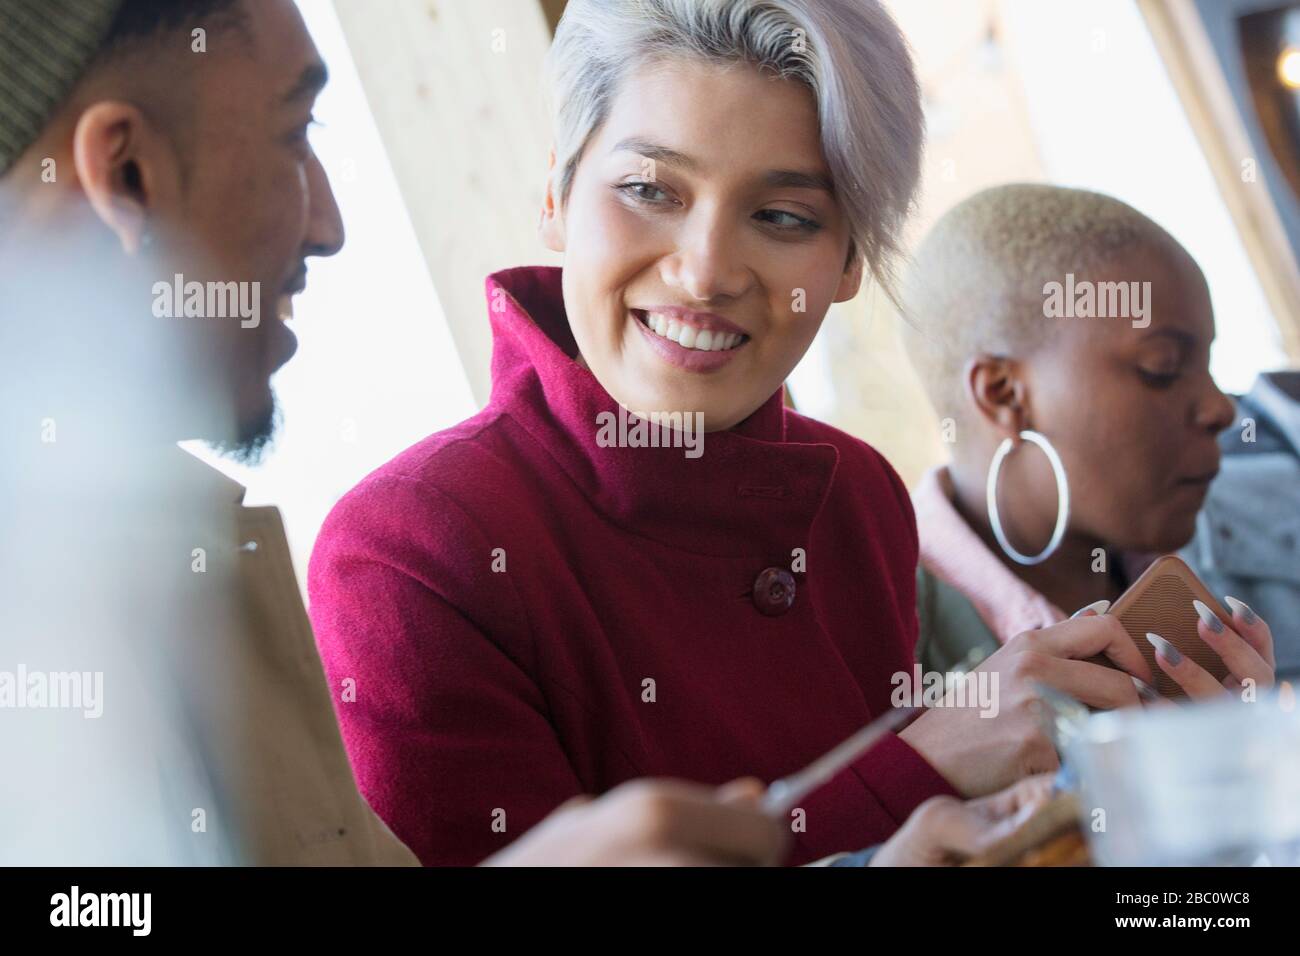 Smiling young woman talking with friend Stock Photo